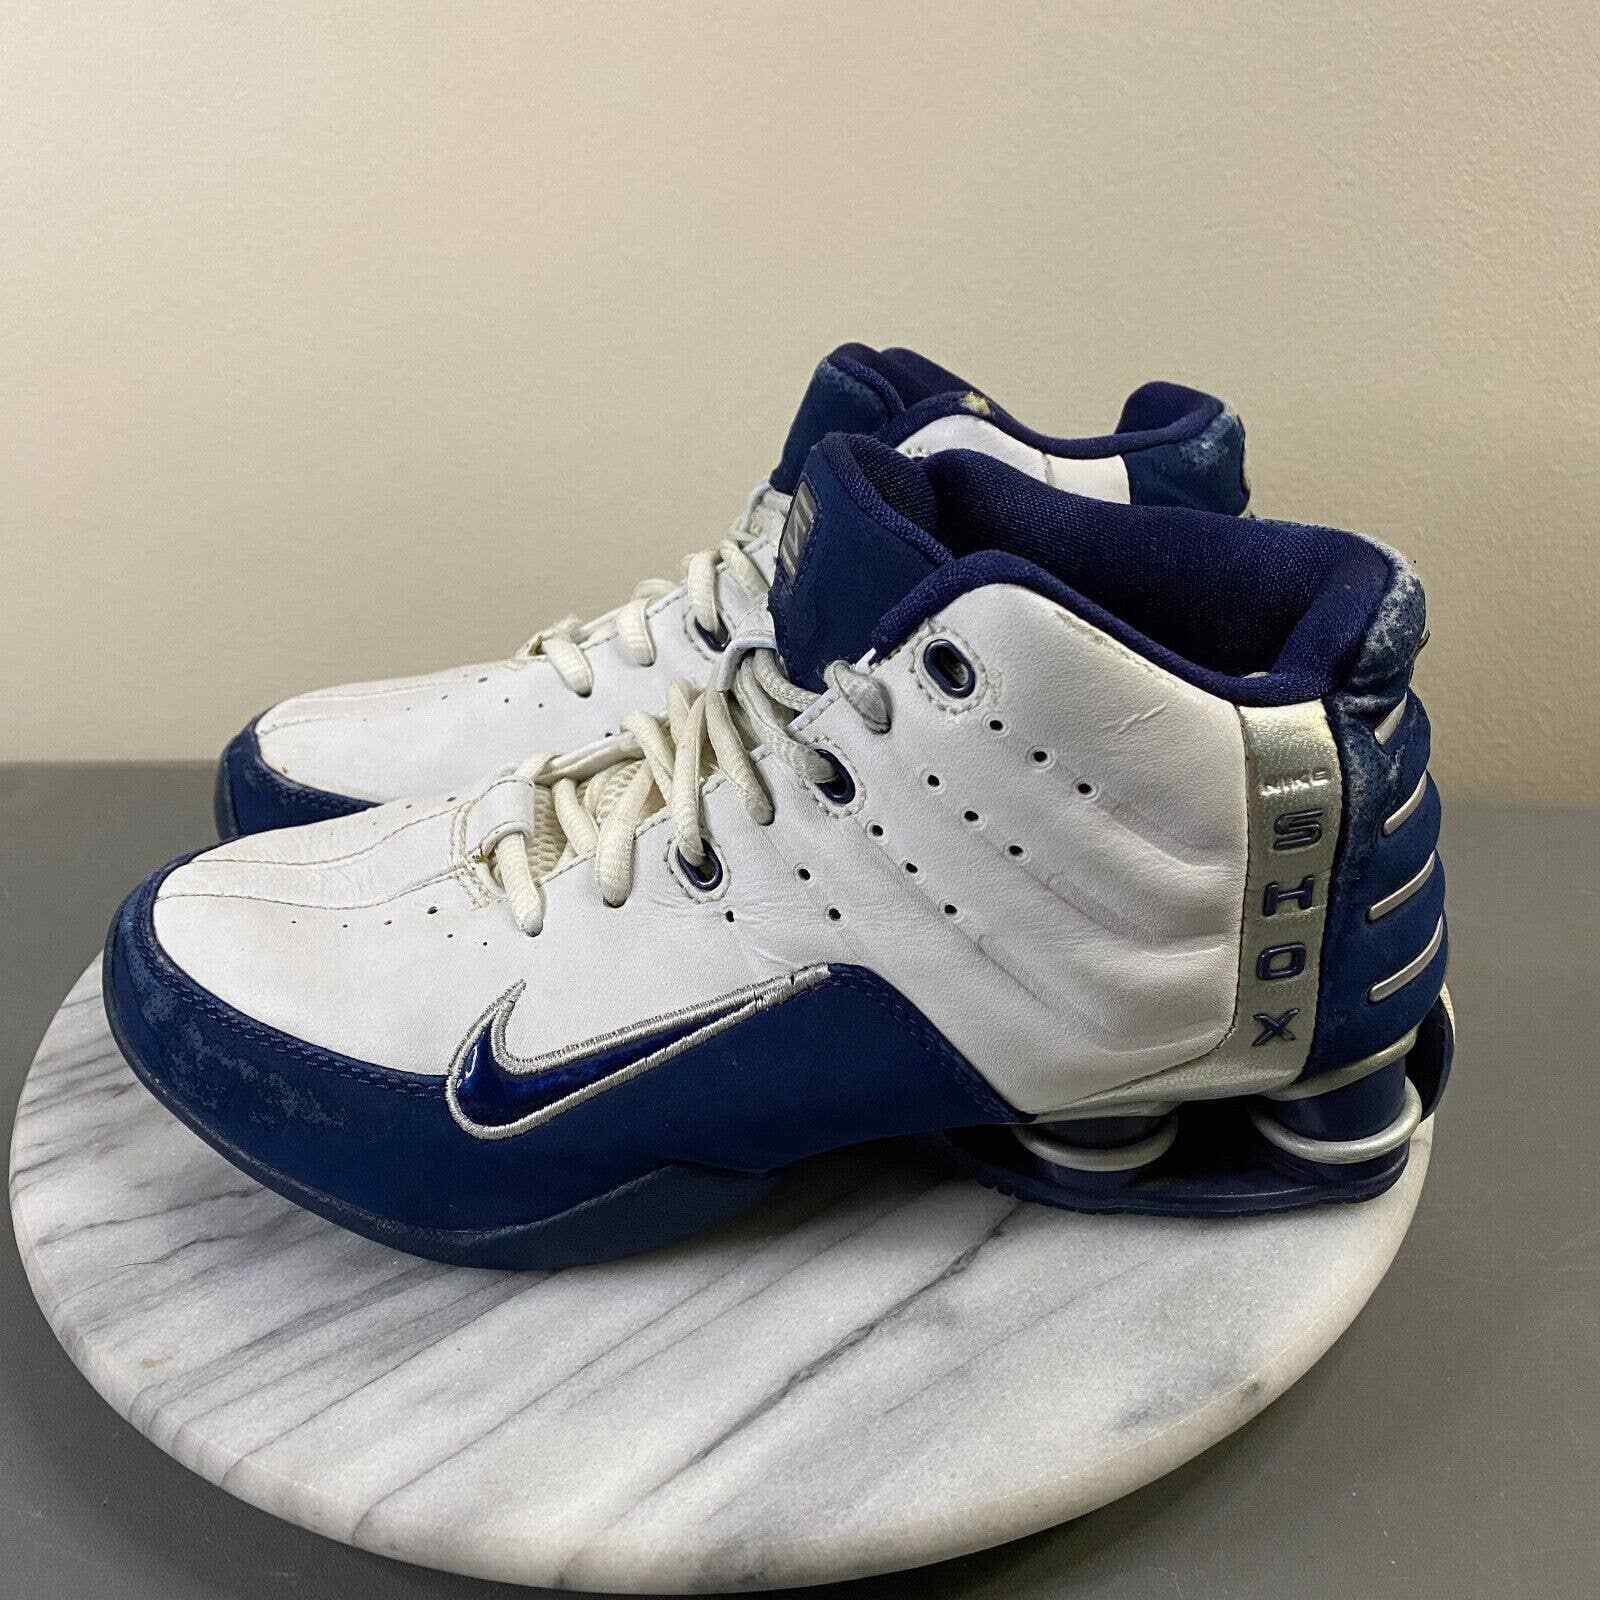 Nike Shox Elevate 308804-141 Mid Top Basketball Shoe White/Blue Youth Size 5